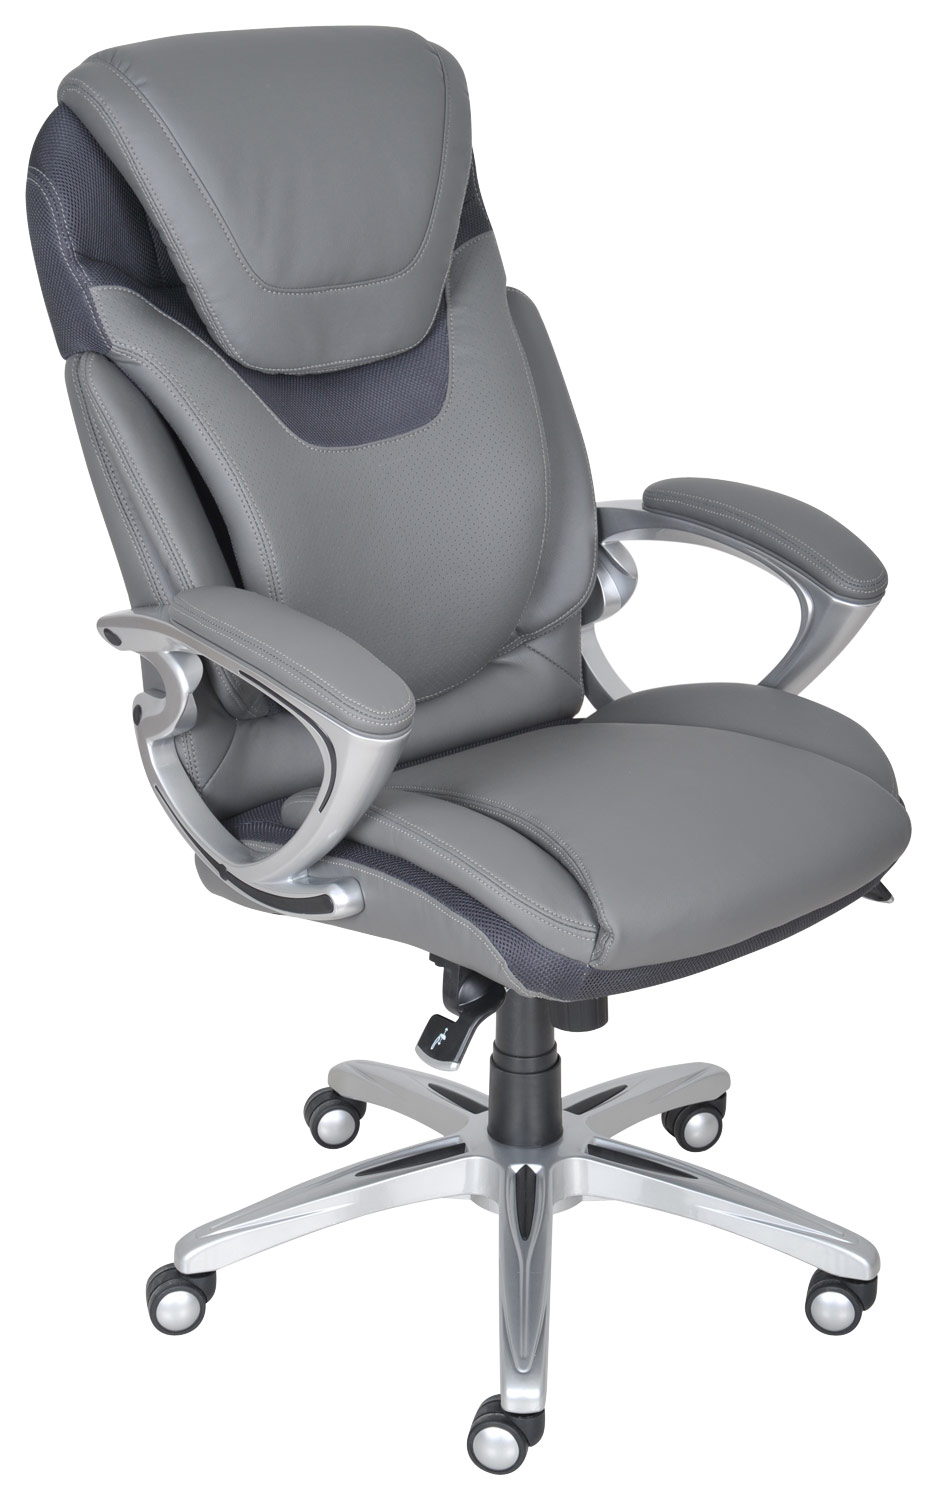 Angle View: Studio Designs - Deluxe Task Chair - Blue/Gray